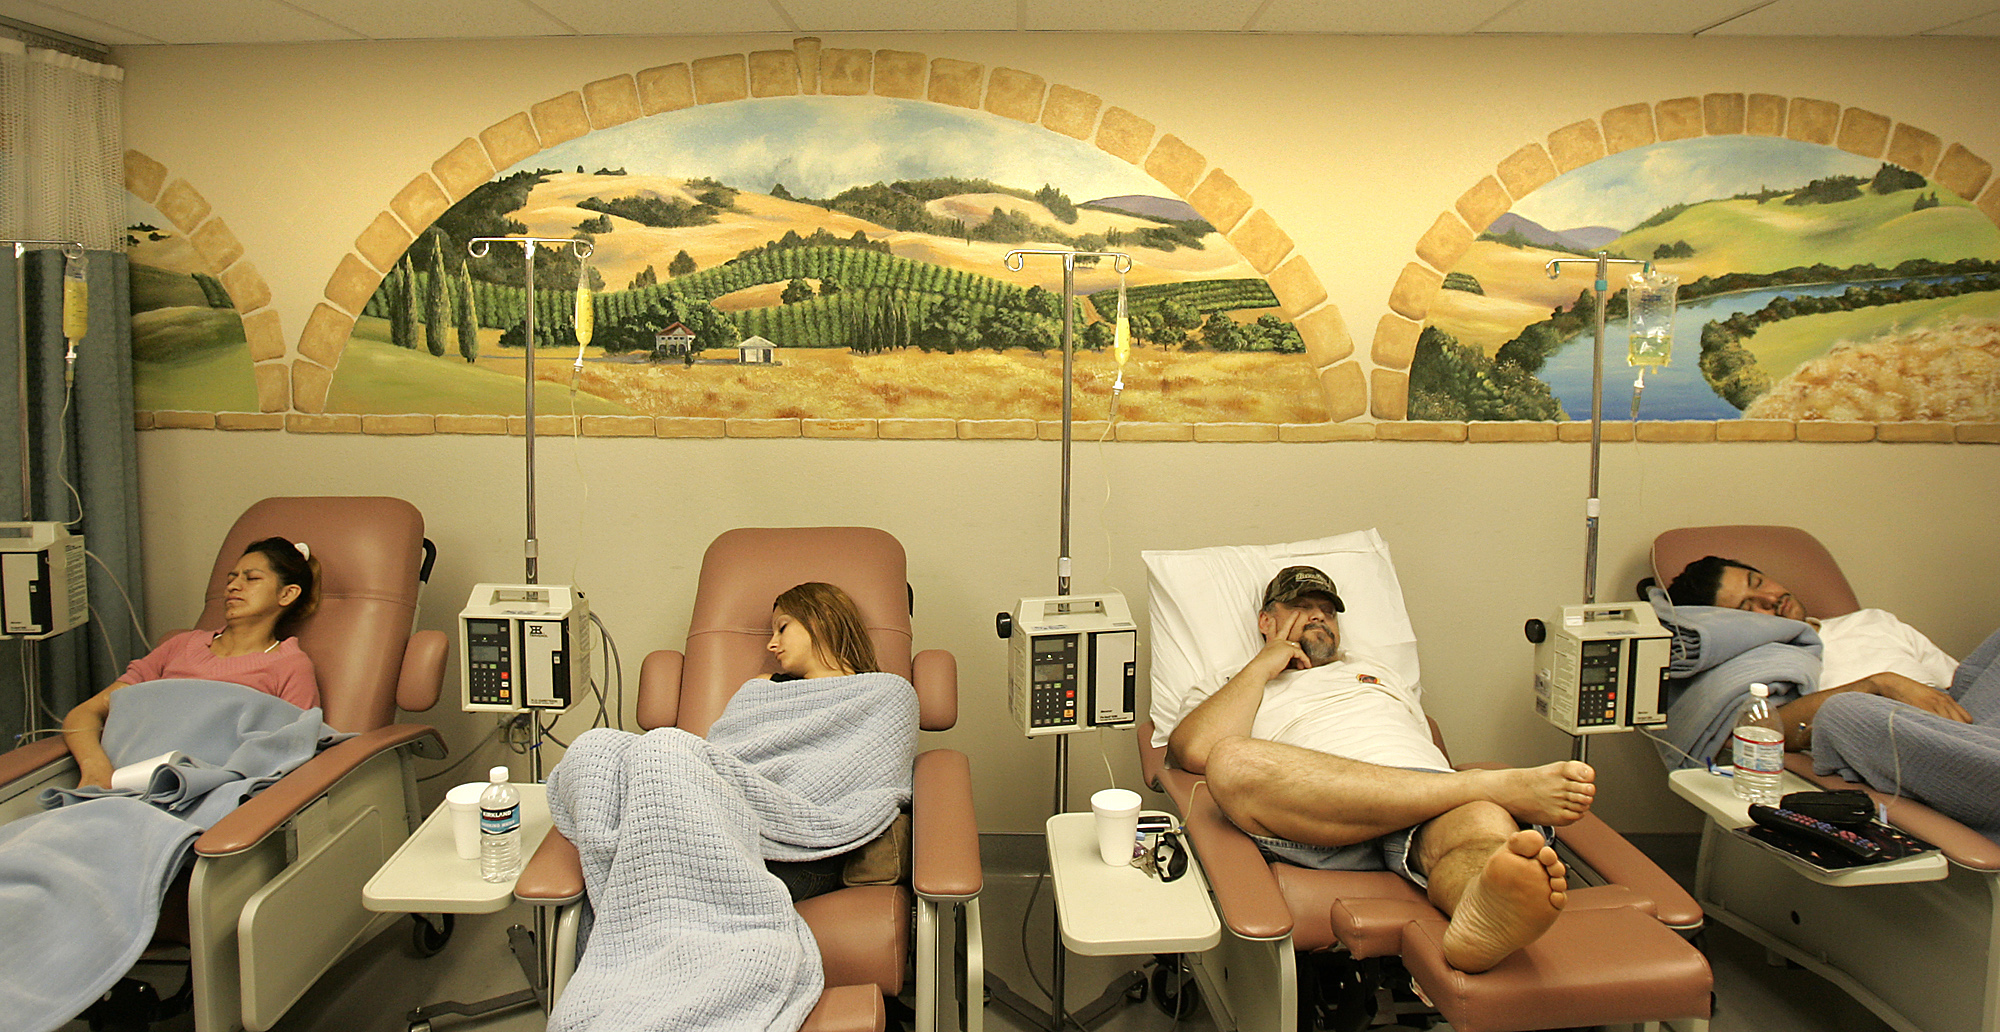 Four medical beds are set close to each other each one with a patient looking sick. Behind them, a series of murals of California